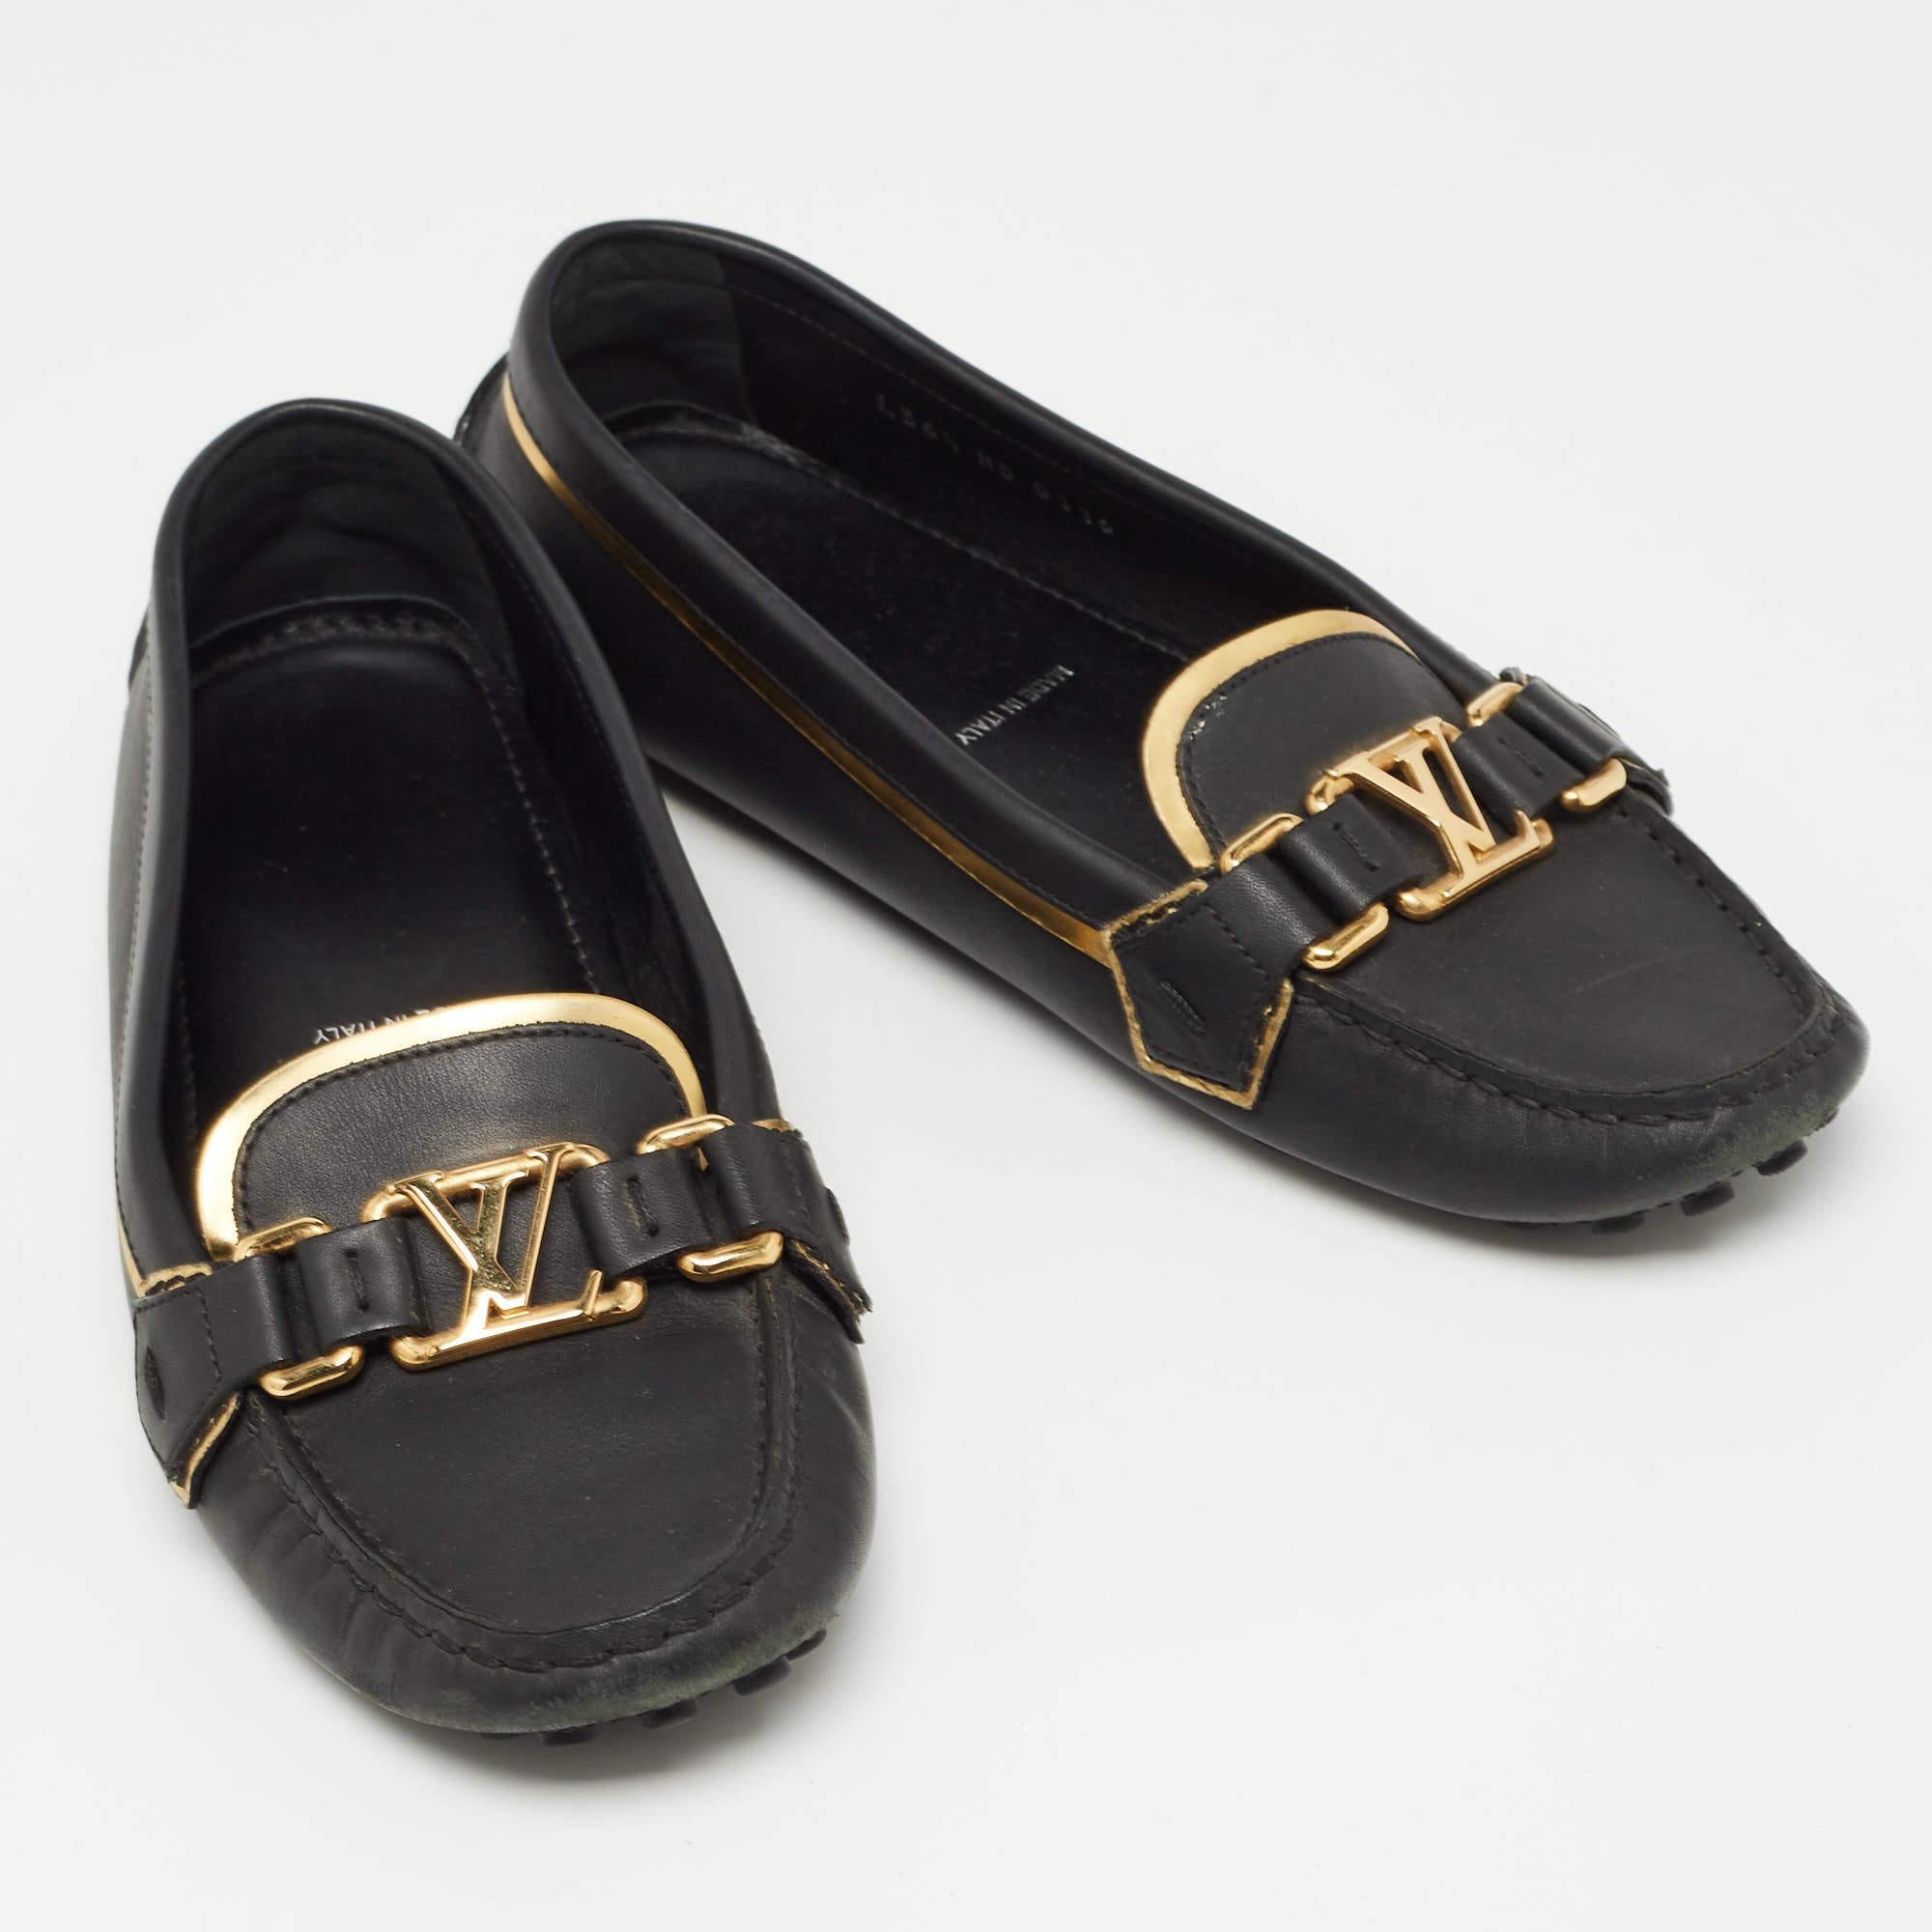 These well-crafted LV loafers have got you covered for all-day plans. They come in a versatile design, and they look great on the feet.

